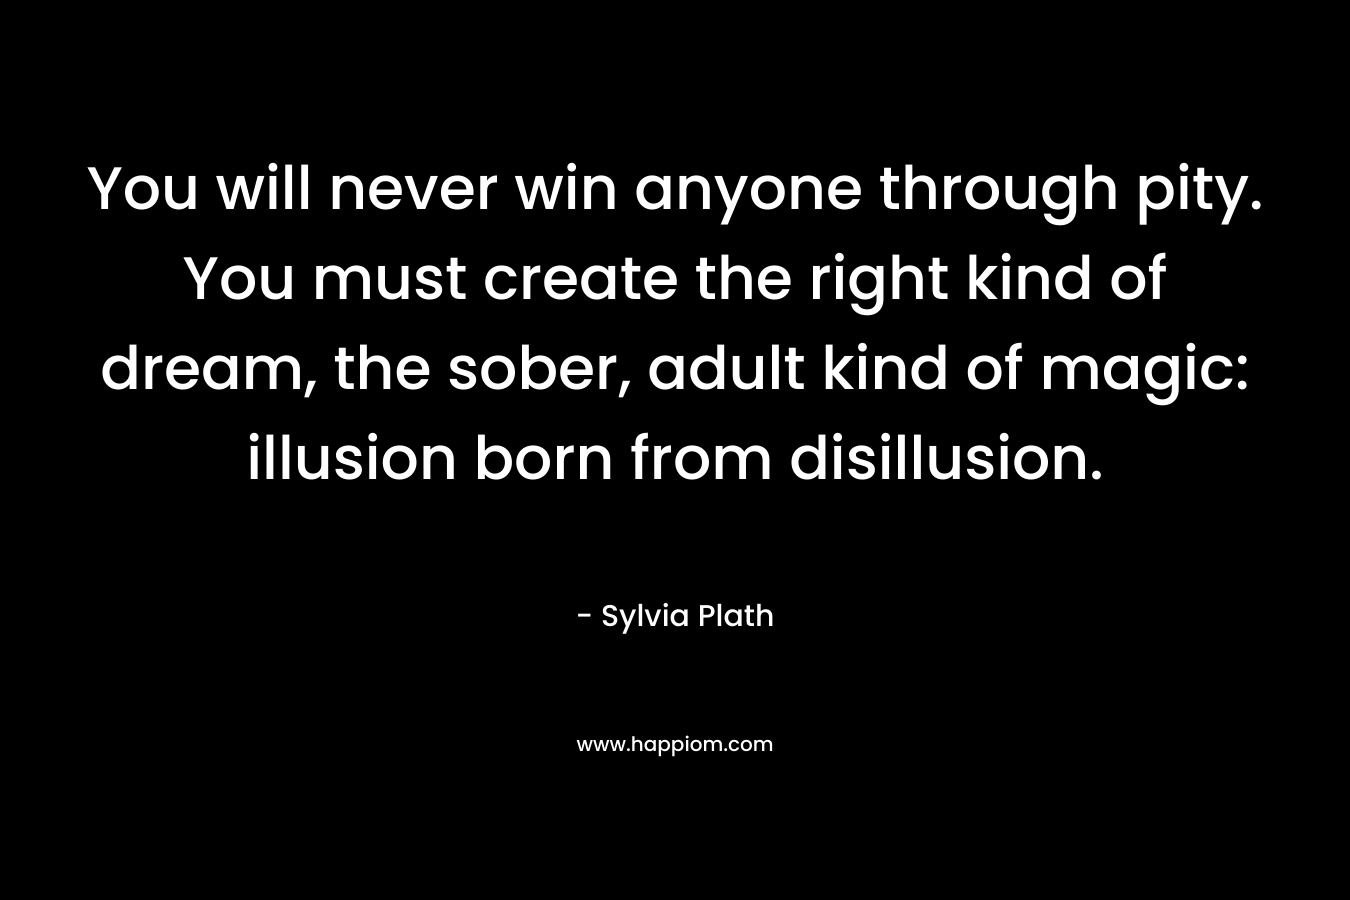 You will never win anyone through pity. You must create the right kind of dream, the sober, adult kind of magic: illusion born from disillusion. – Sylvia Plath